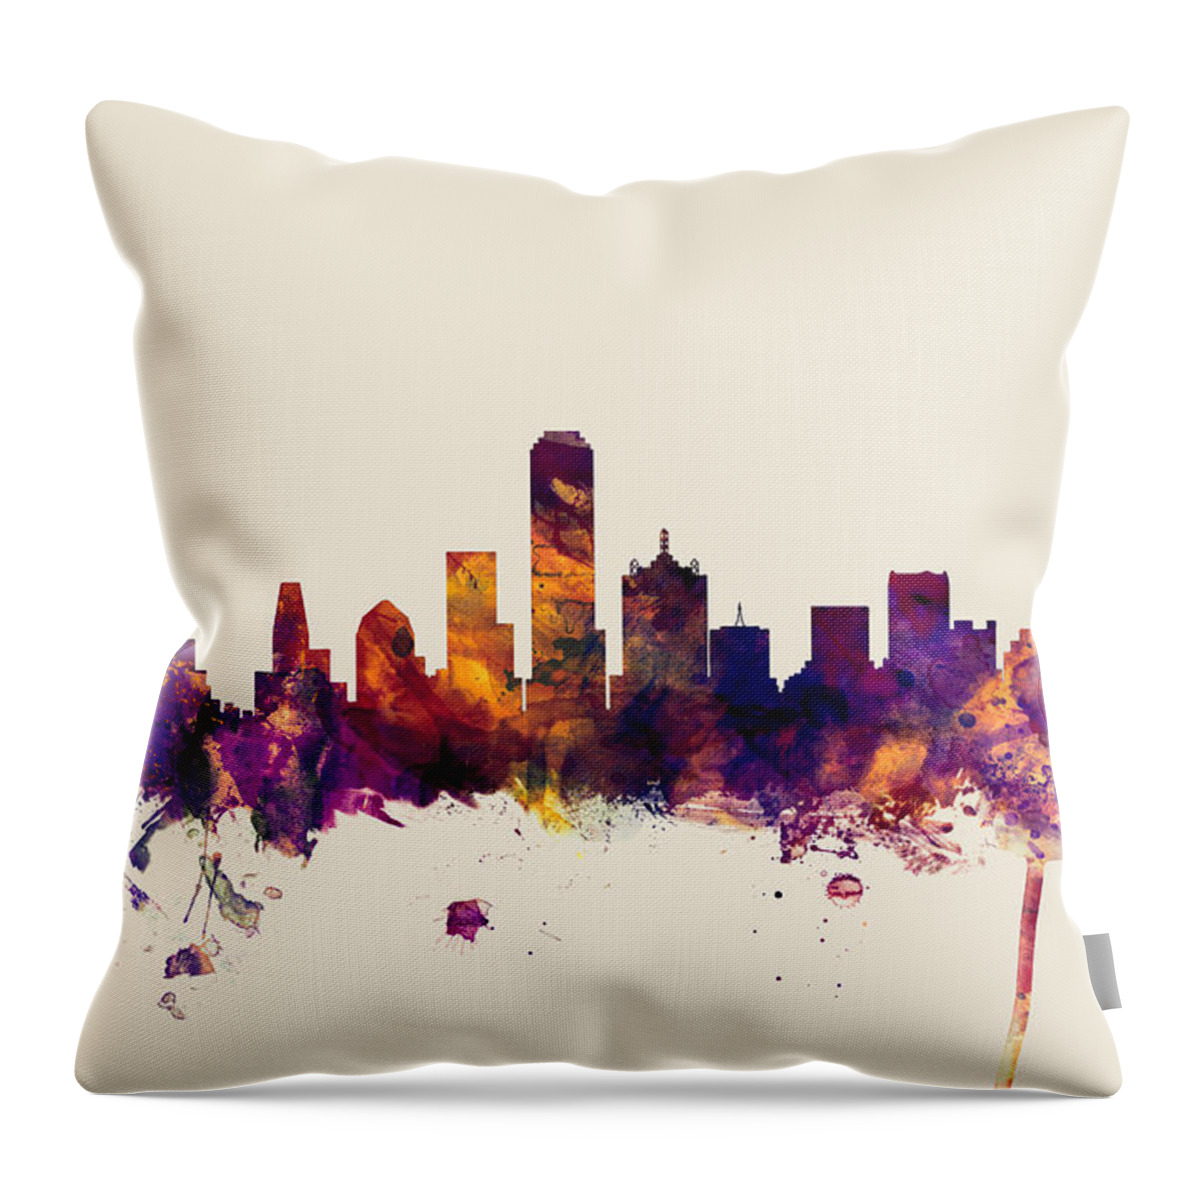 United States Throw Pillow featuring the digital art Dallas Texas Skyline by Michael Tompsett